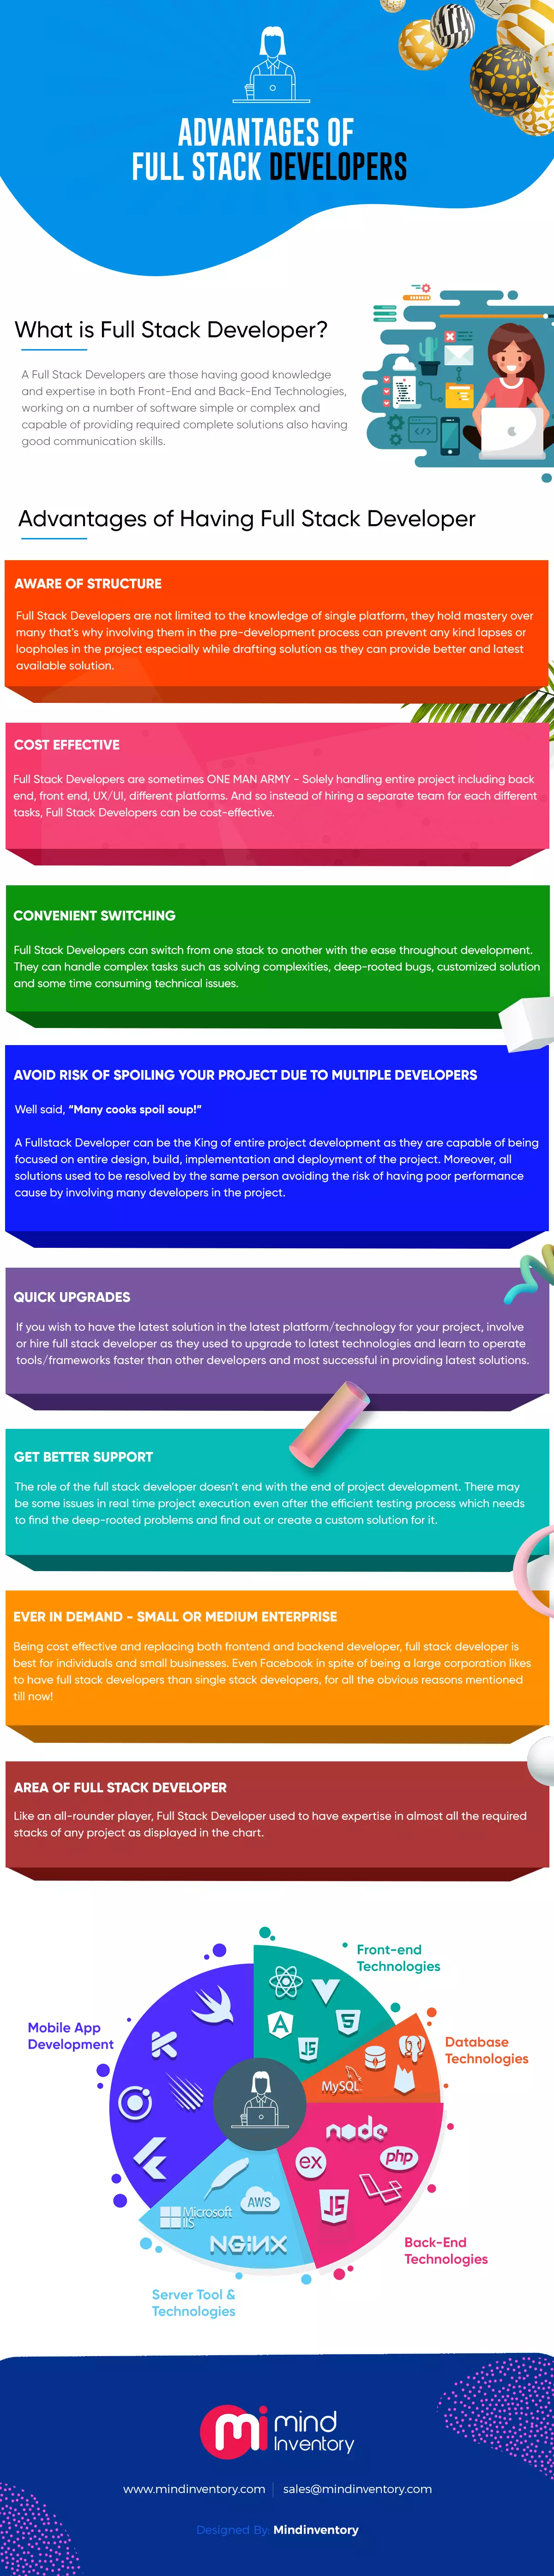 advantages of full stack developers infographic